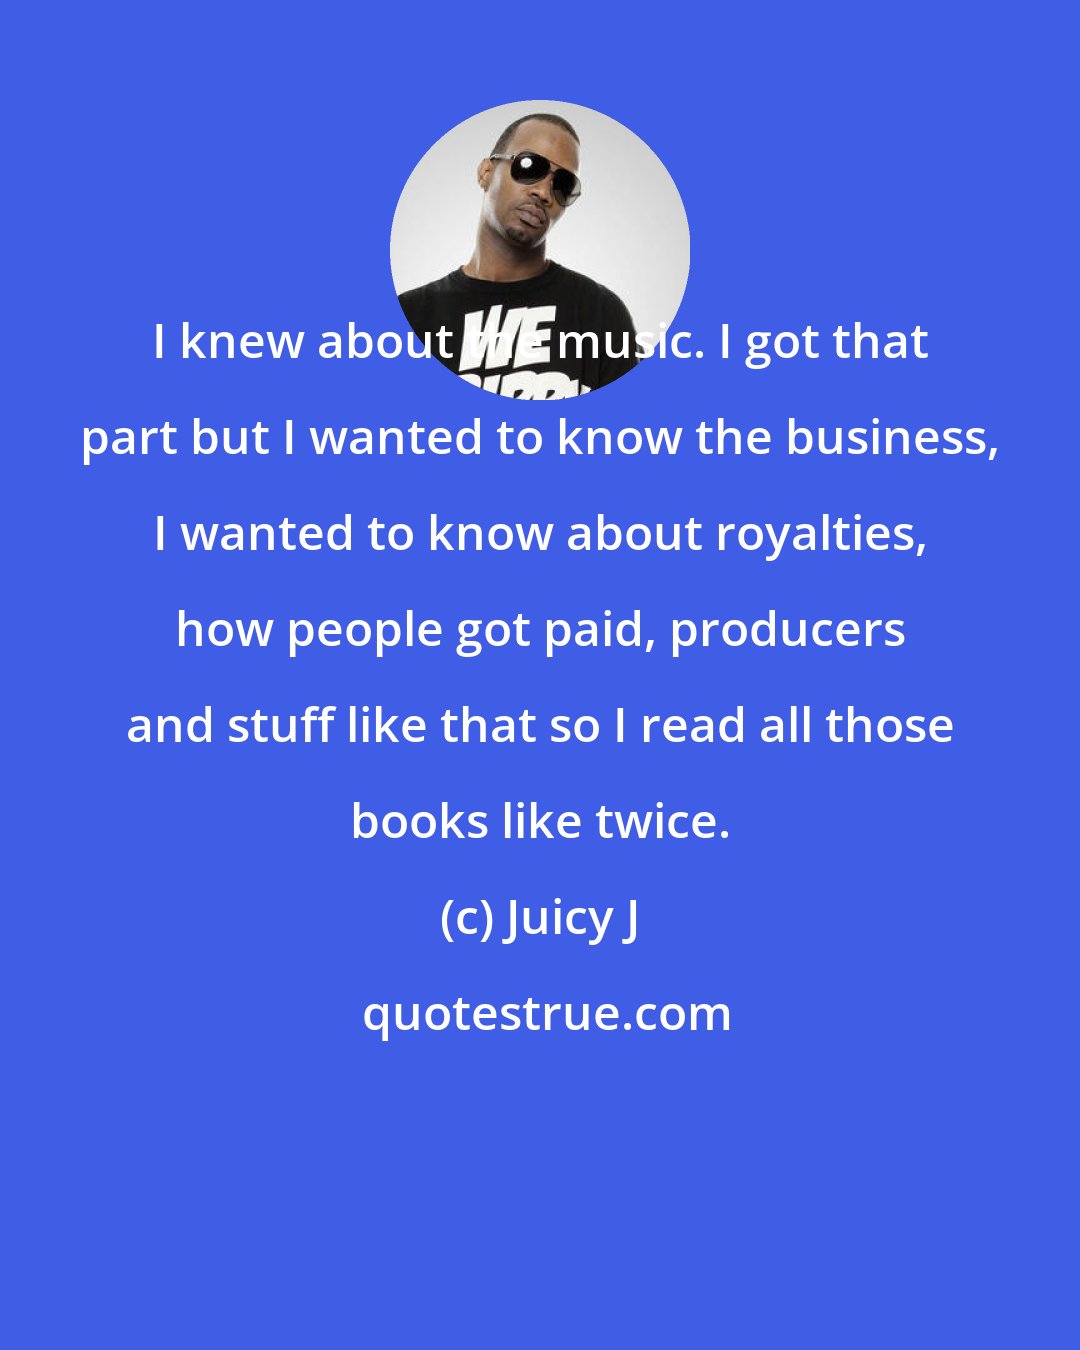 Juicy J: I knew about the music. I got that part but I wanted to know the business, I wanted to know about royalties, how people got paid, producers and stuff like that so I read all those books like twice.